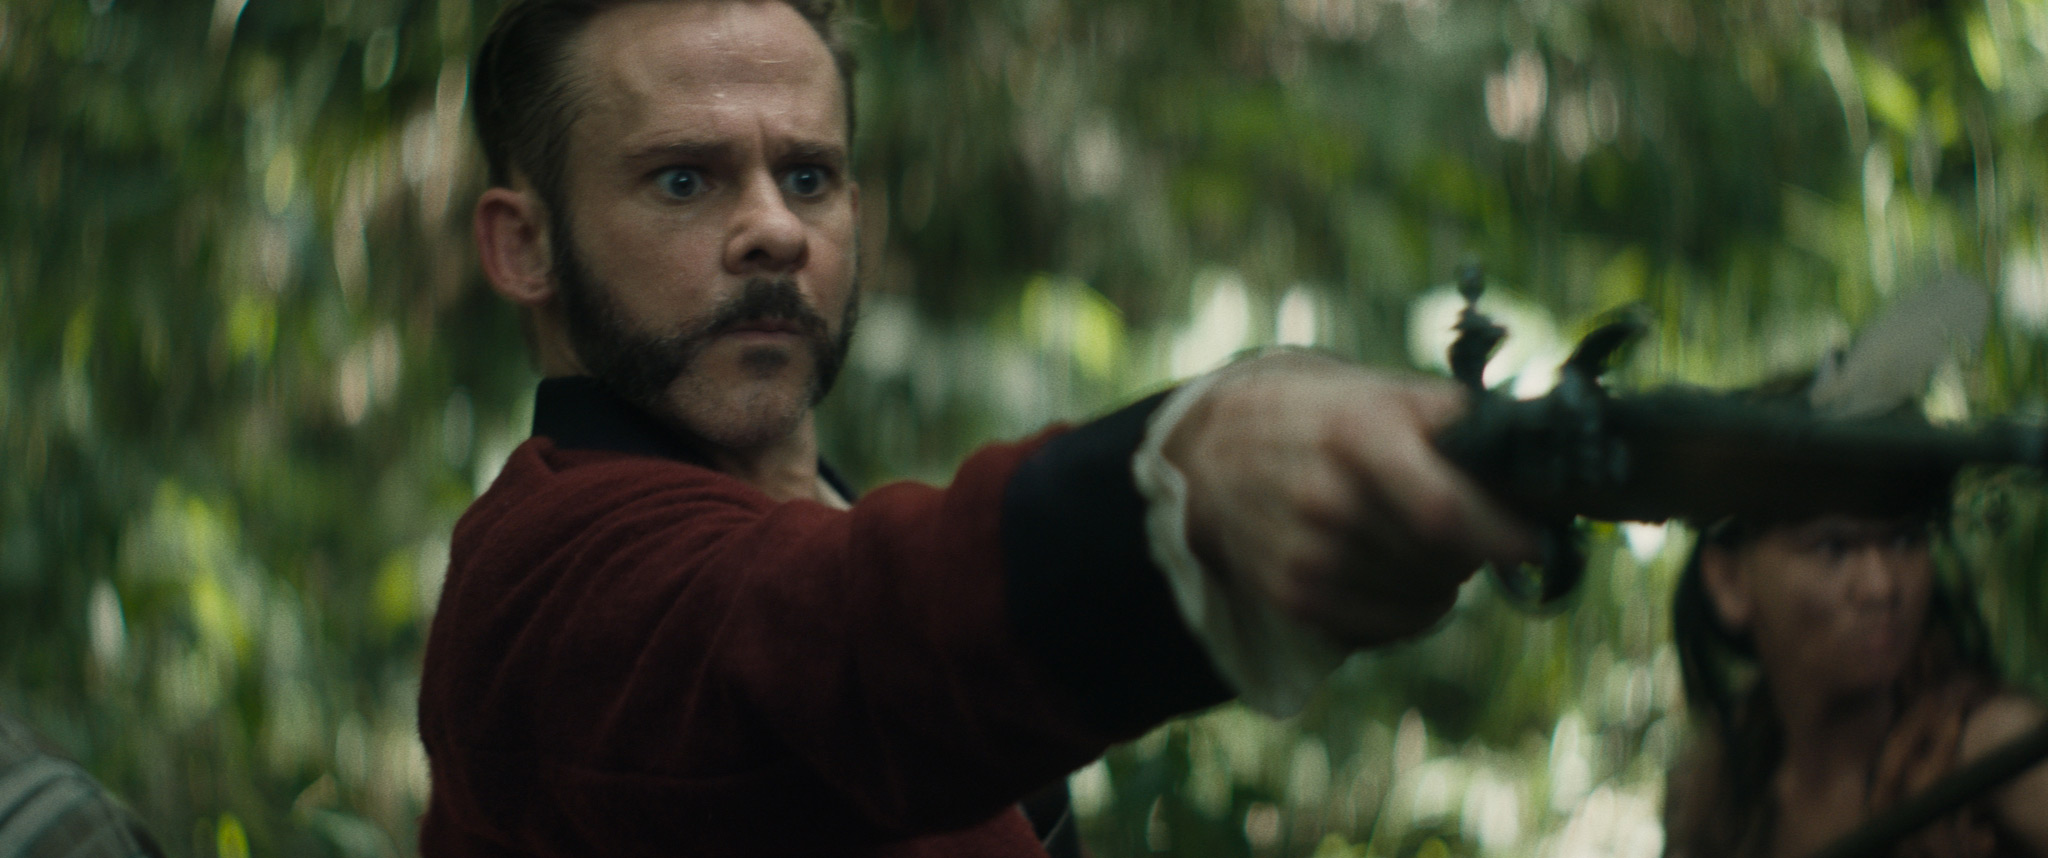 Edge Of The World: Dominic Monaghan Shares The Joy For Immersive Jobs [Exclusive Interview]